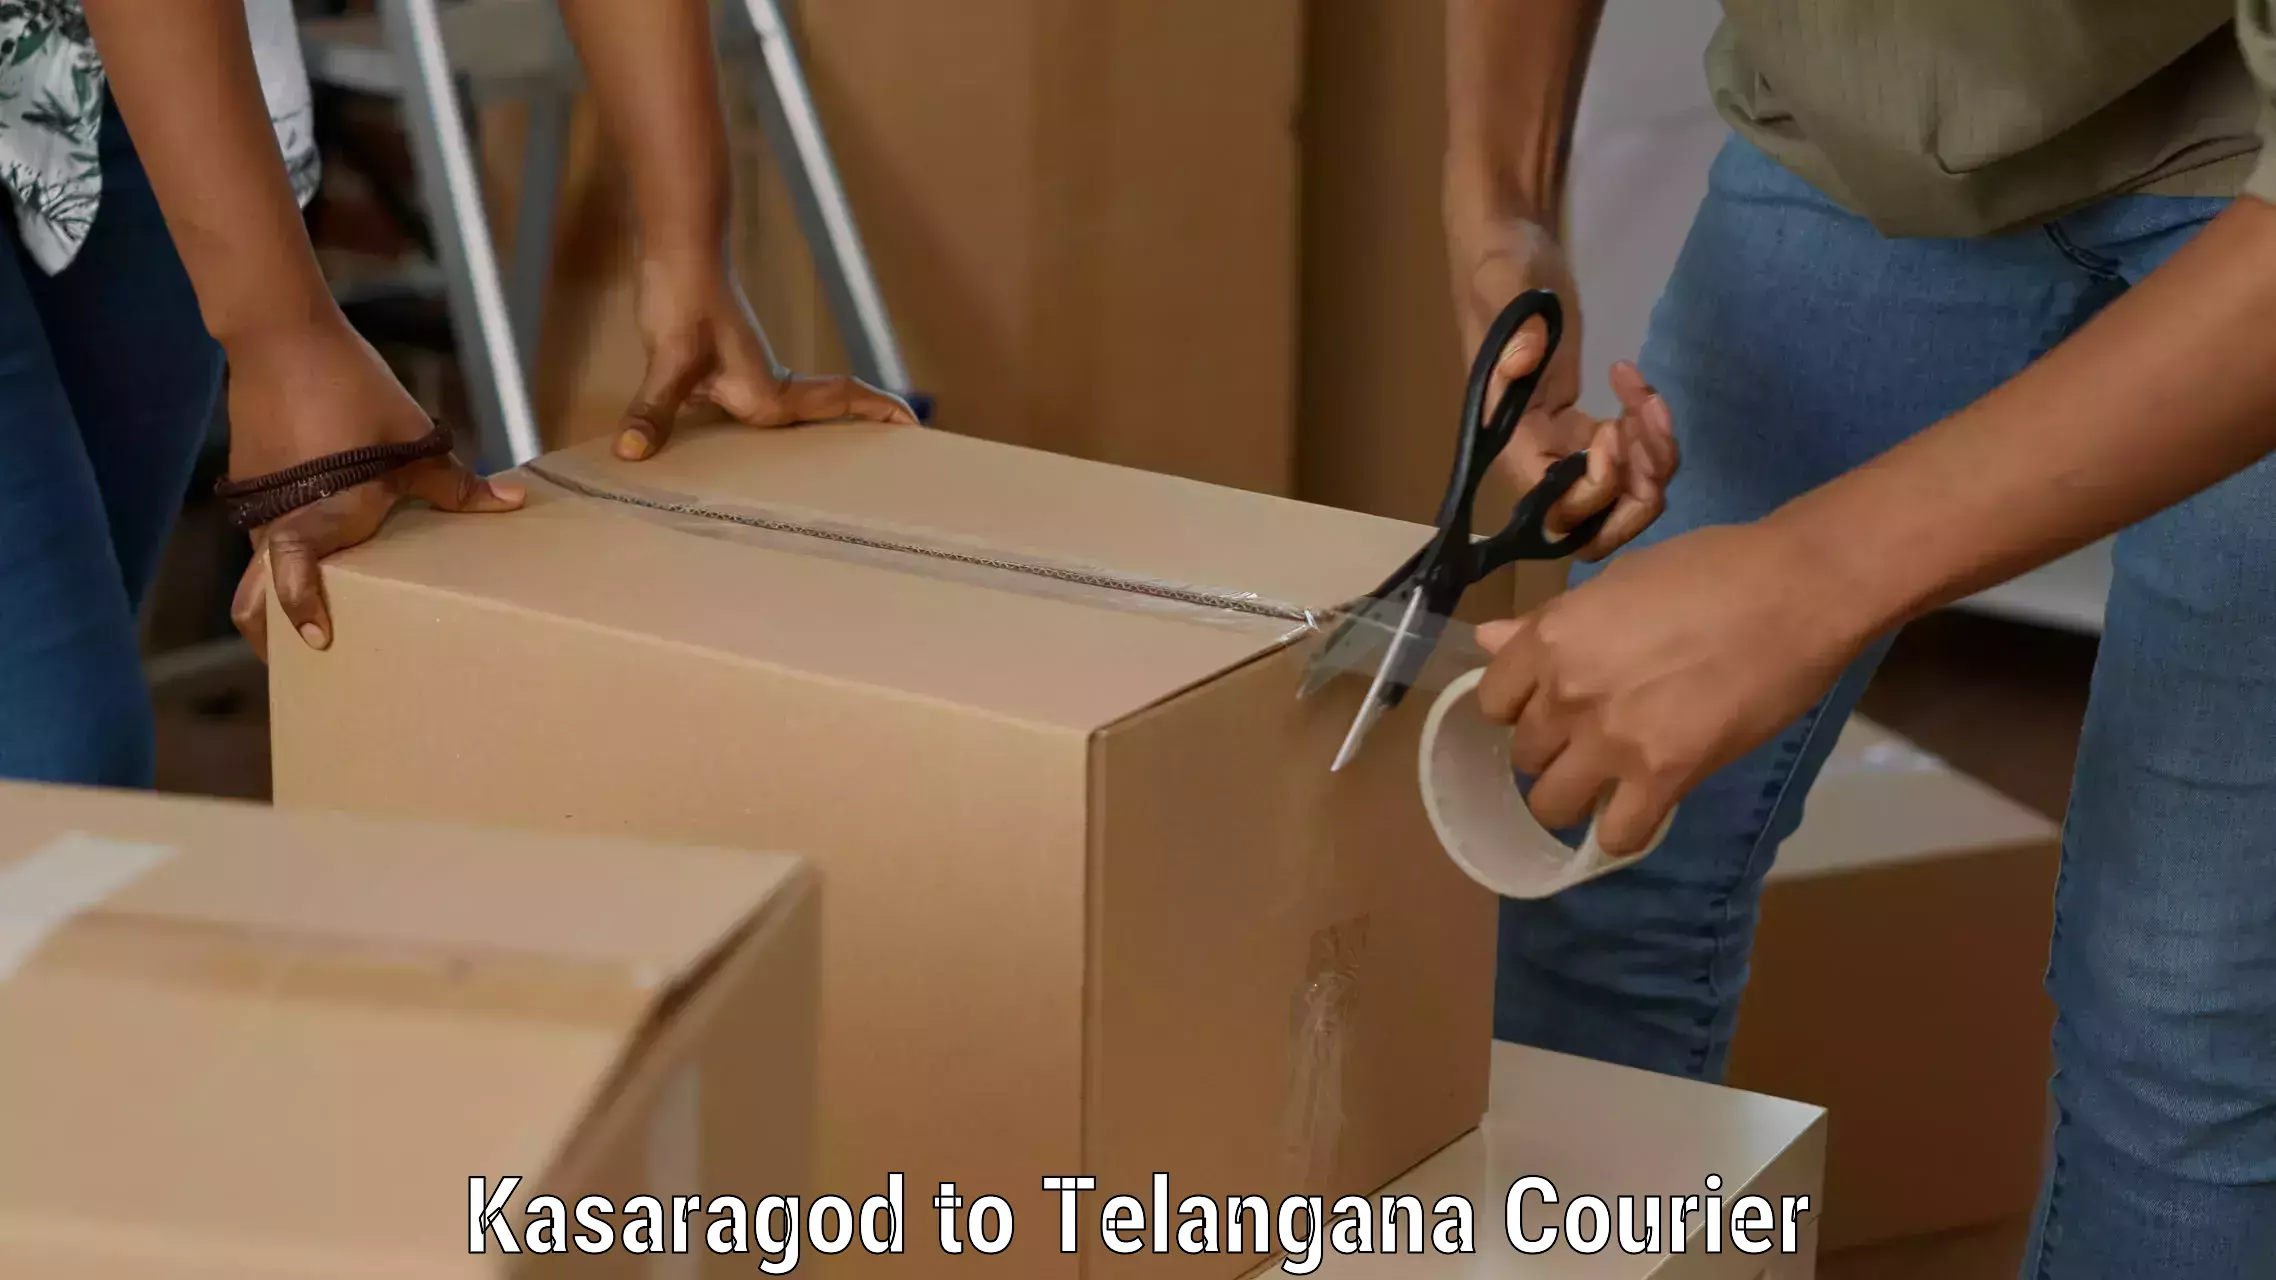 Speedy delivery service Kasaragod to Gollapalli